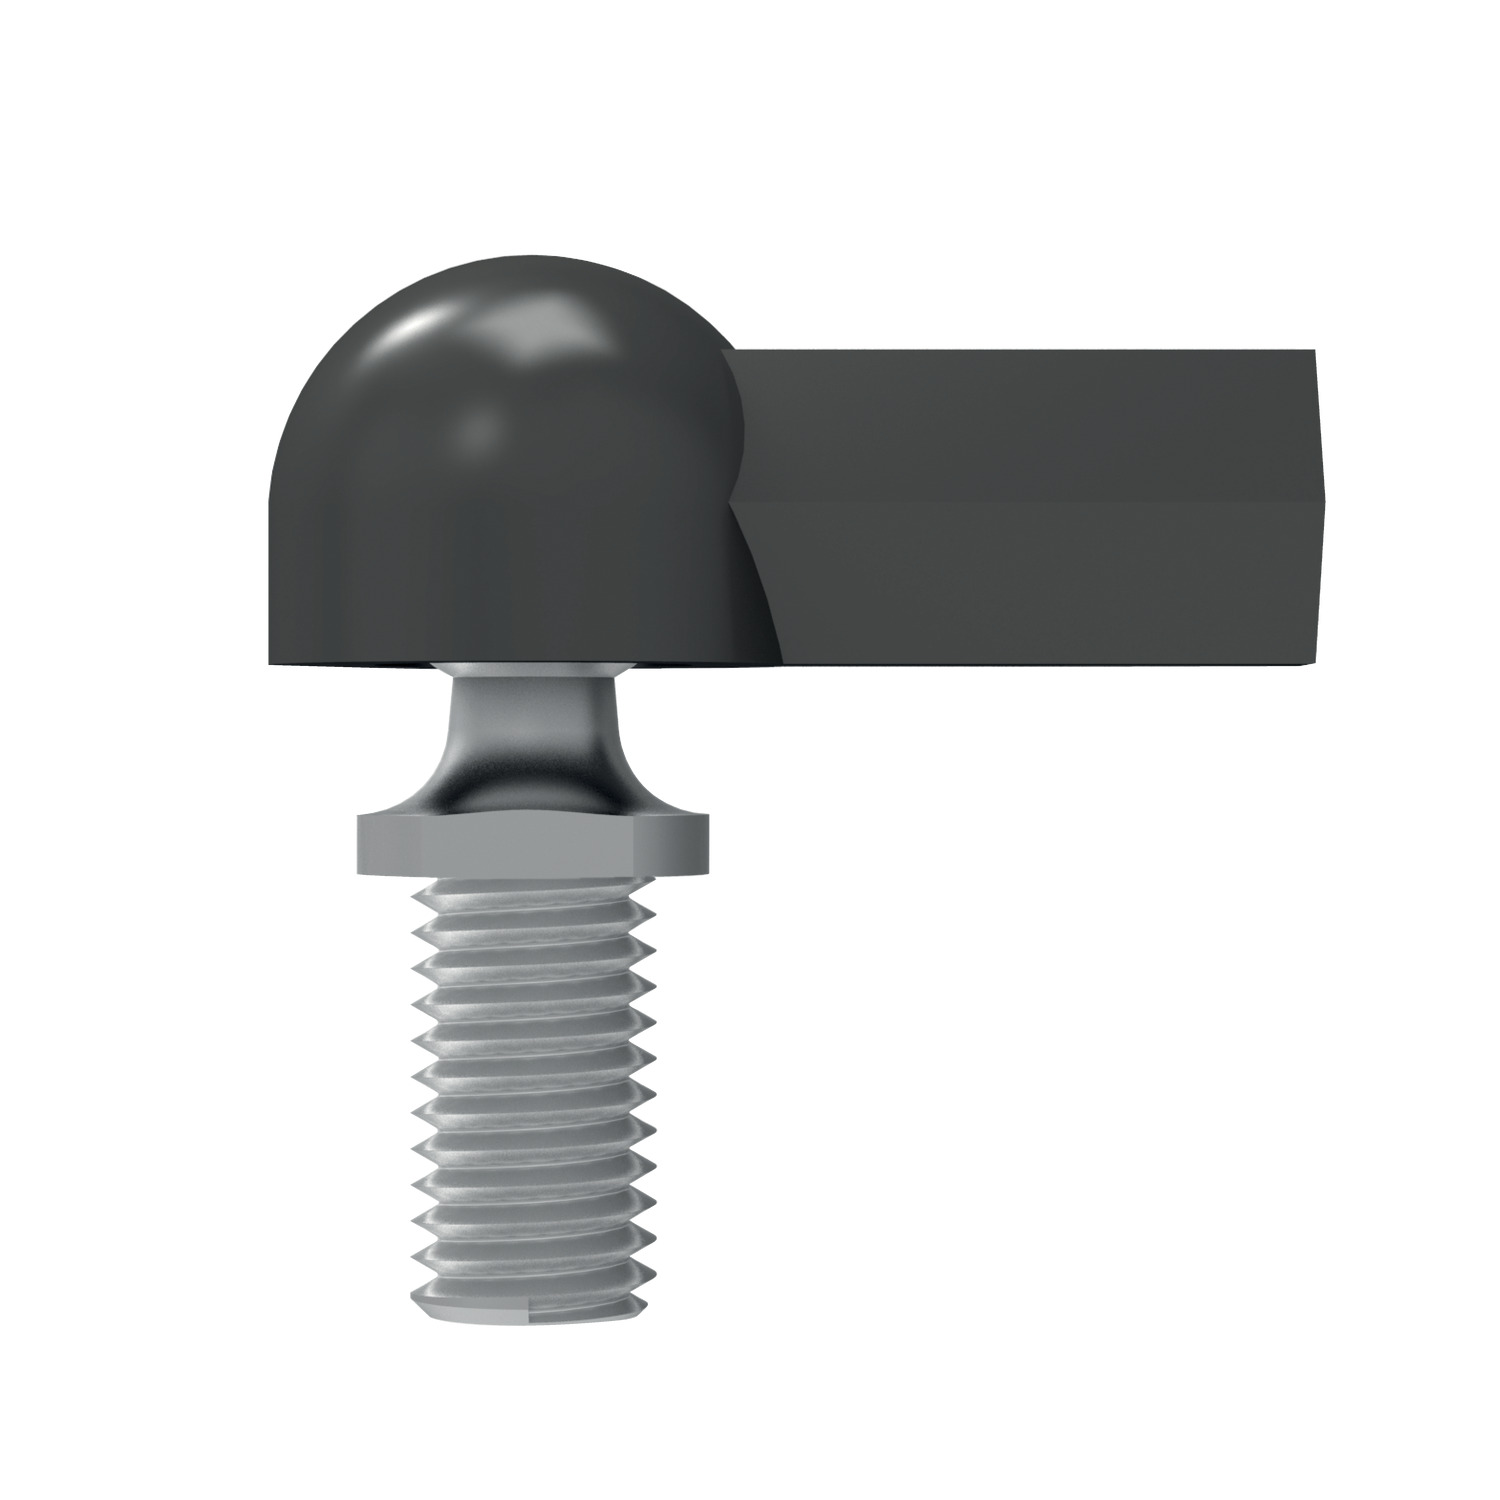 R3520 - Plastic Ball and Socket Joint